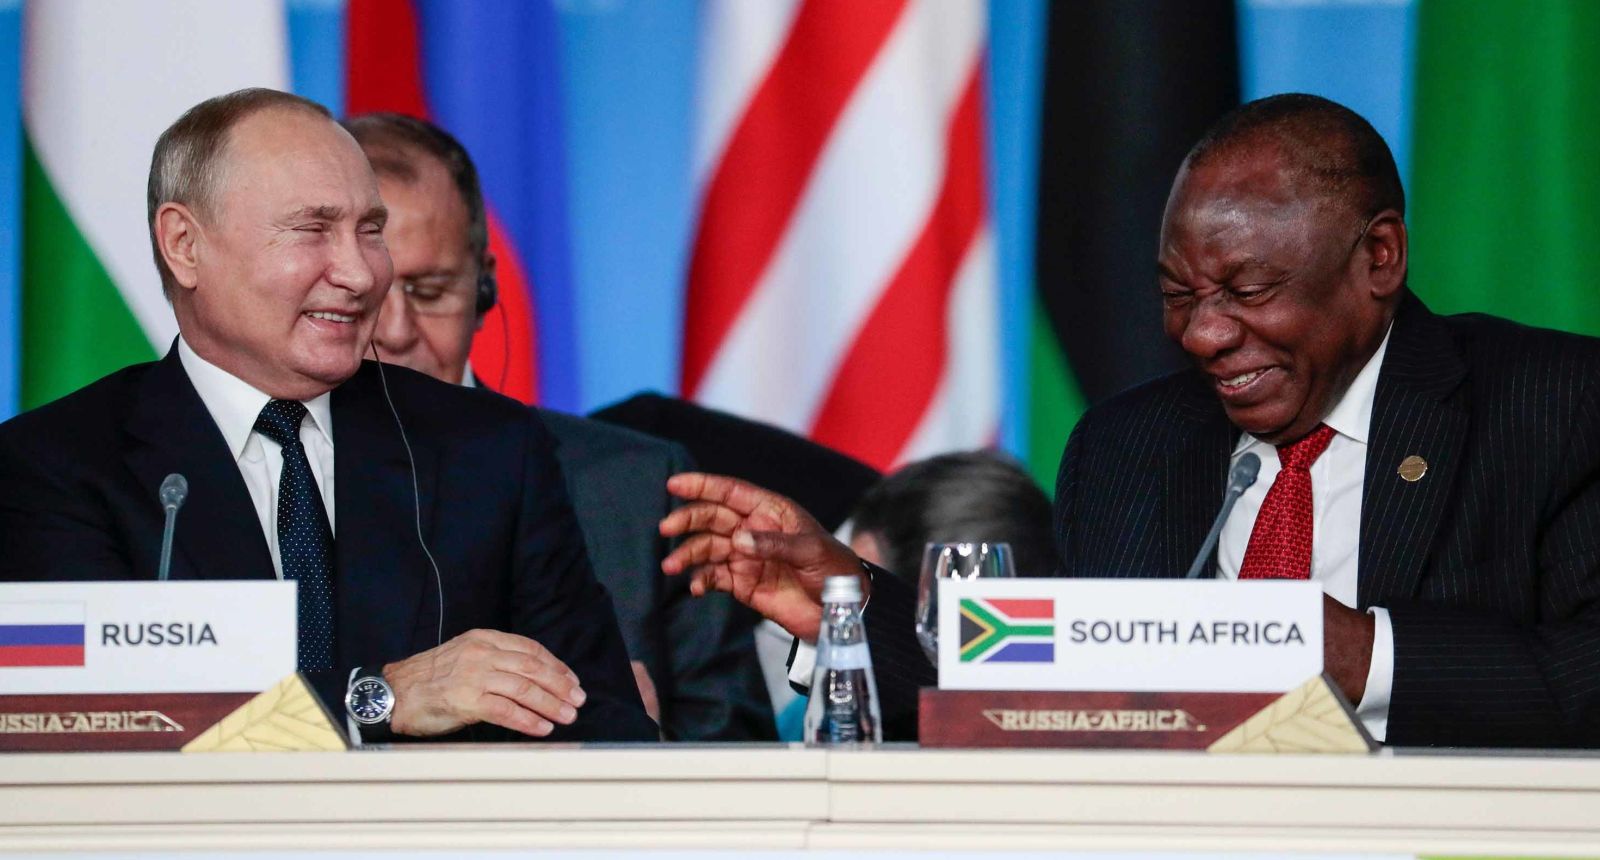 Russian president Vladimir Putin has gone to great lengths to court support from other BRICS leaders like President Cyril Ramaphosa of South Africa.